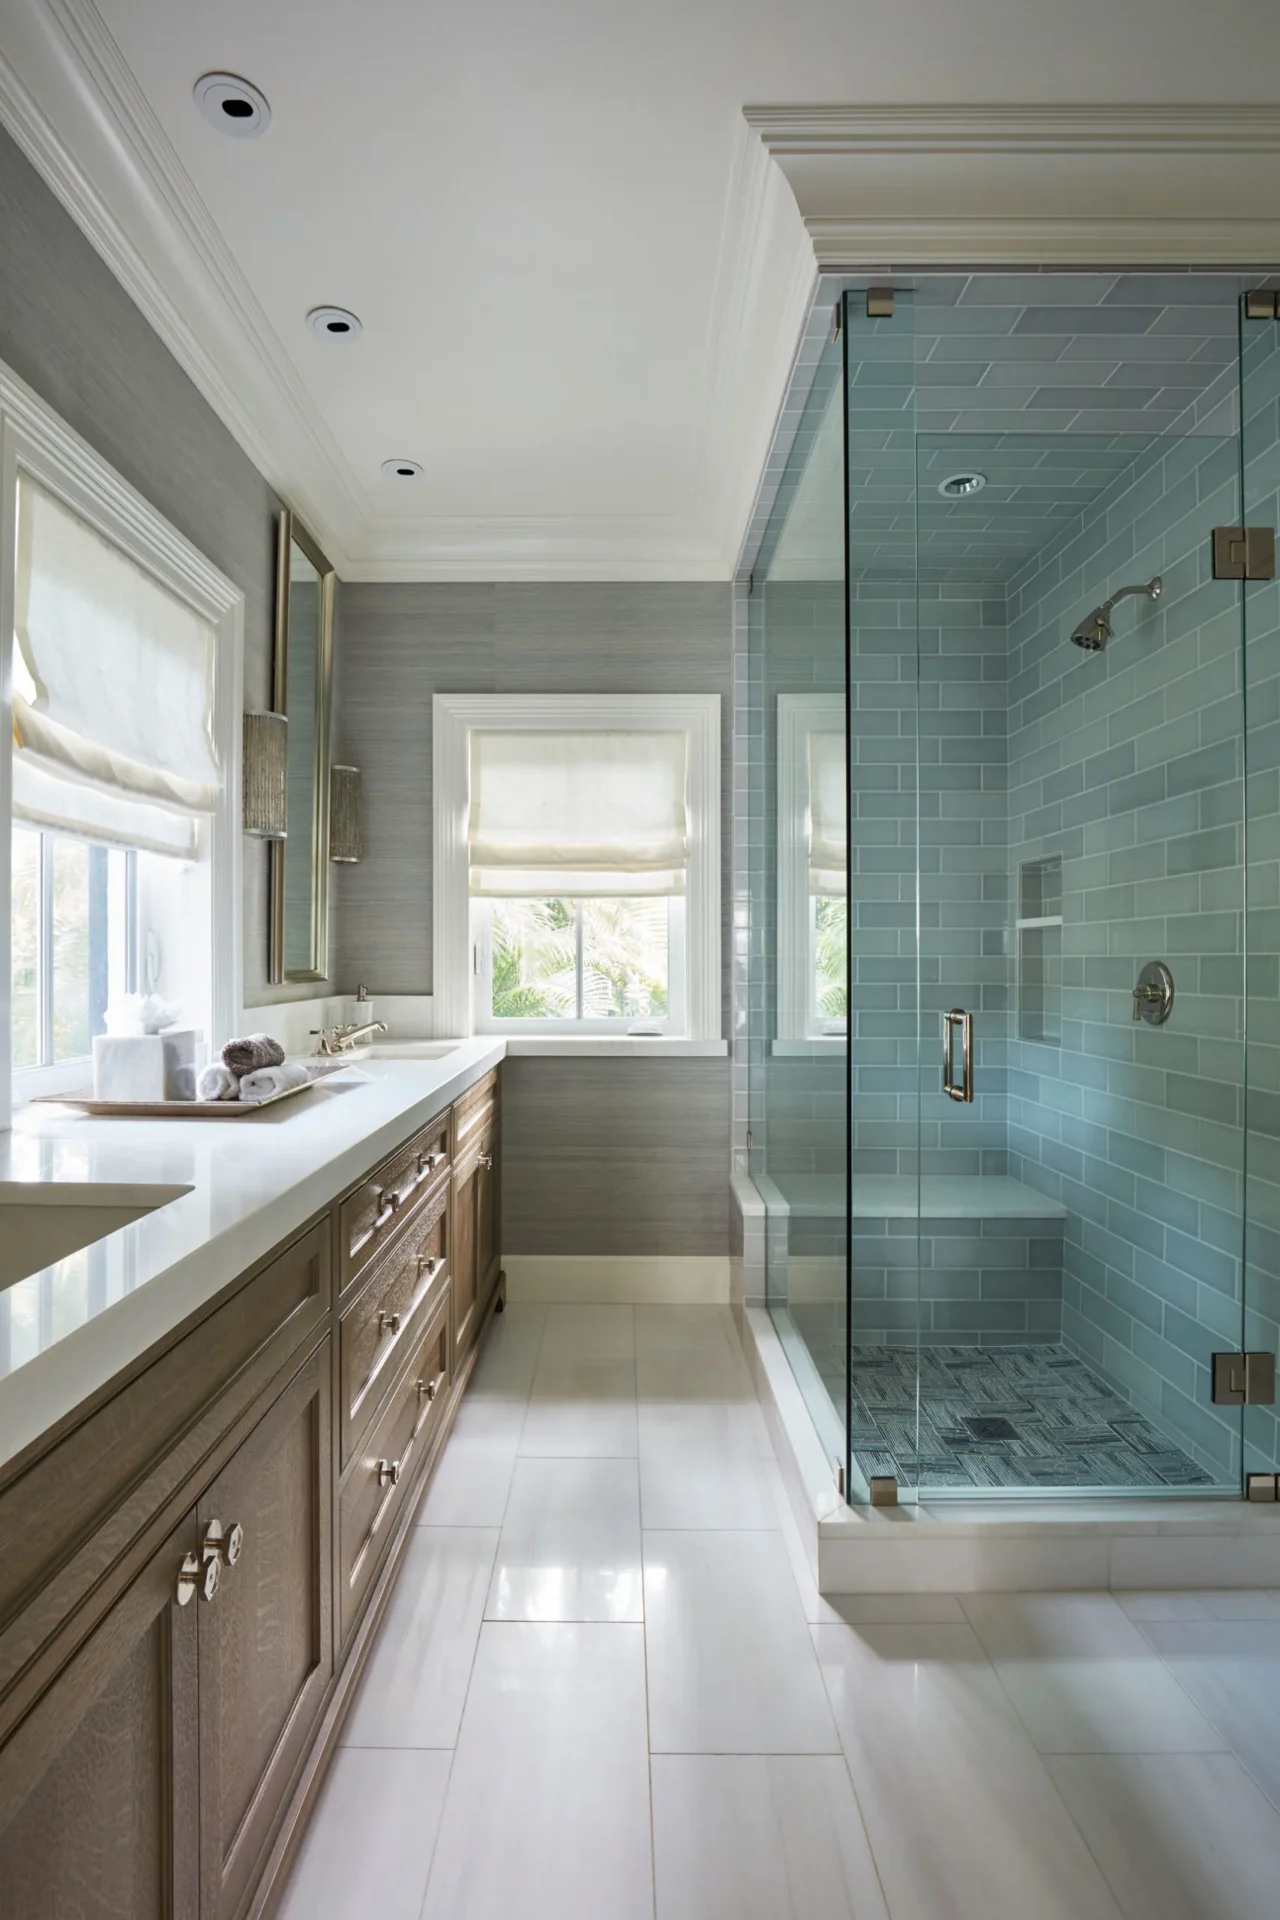 A bathroom with a large glass shower and marble counter.